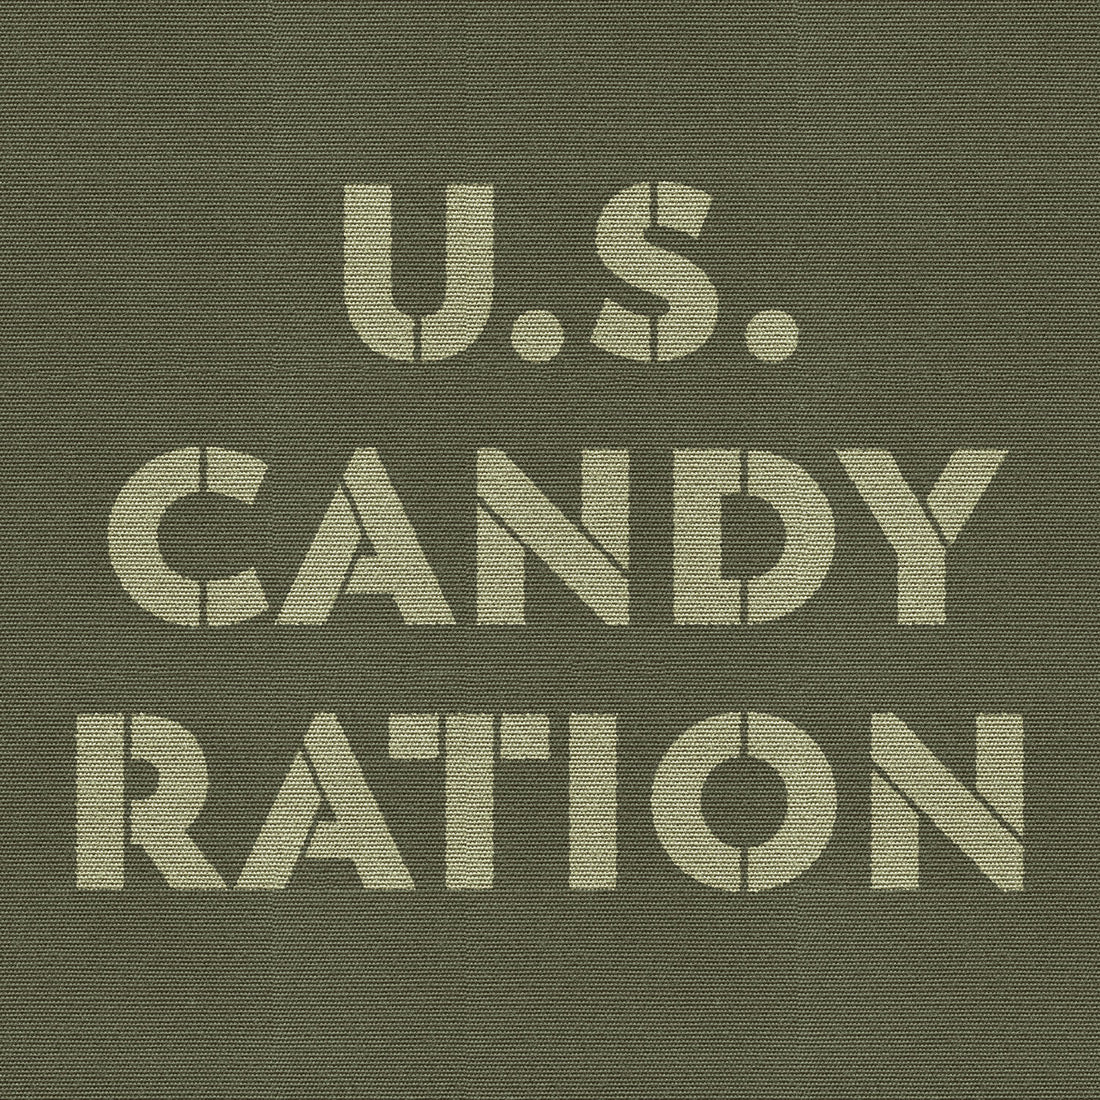 How The Candy Bar Became A War Icon